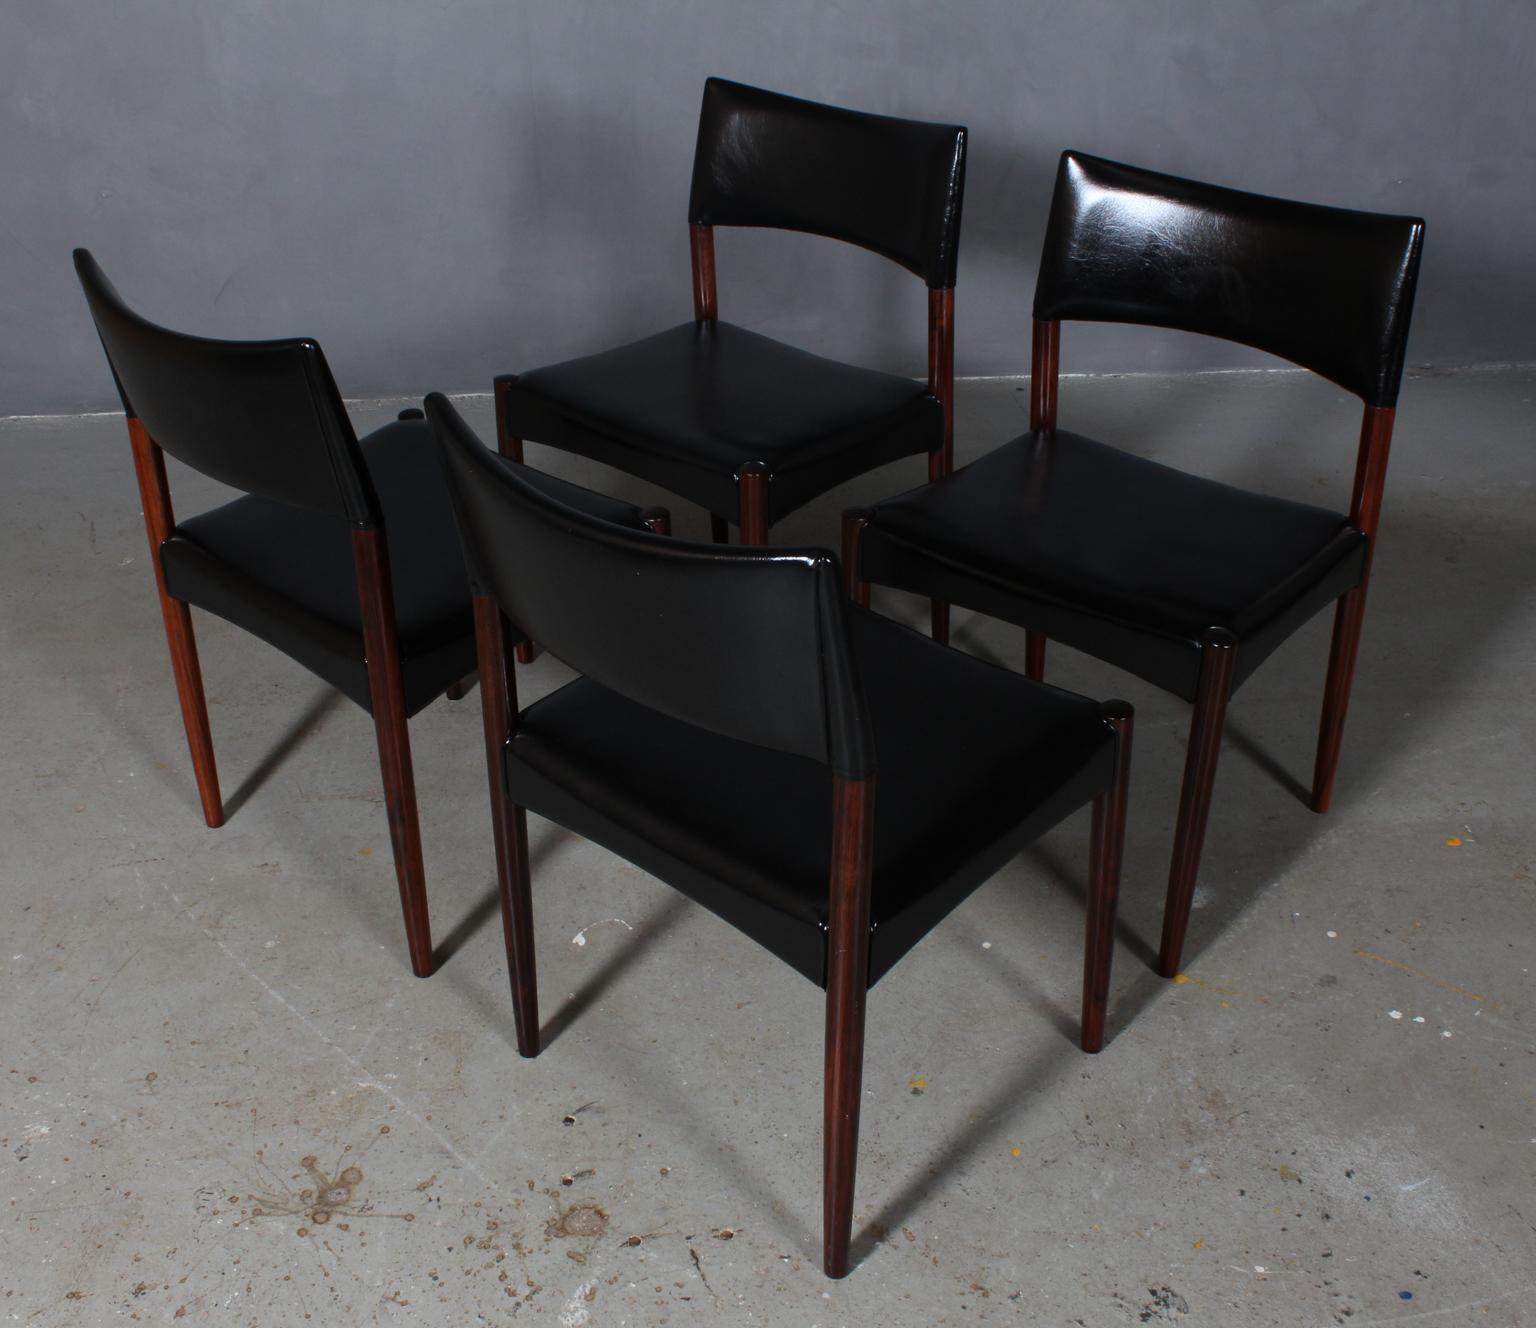 Einer Larsen & Aksel Bender Madsen dining chairs original upholstered with skai.

Frame of rosewood.

Made by Cabinetmaker Willy Beck.